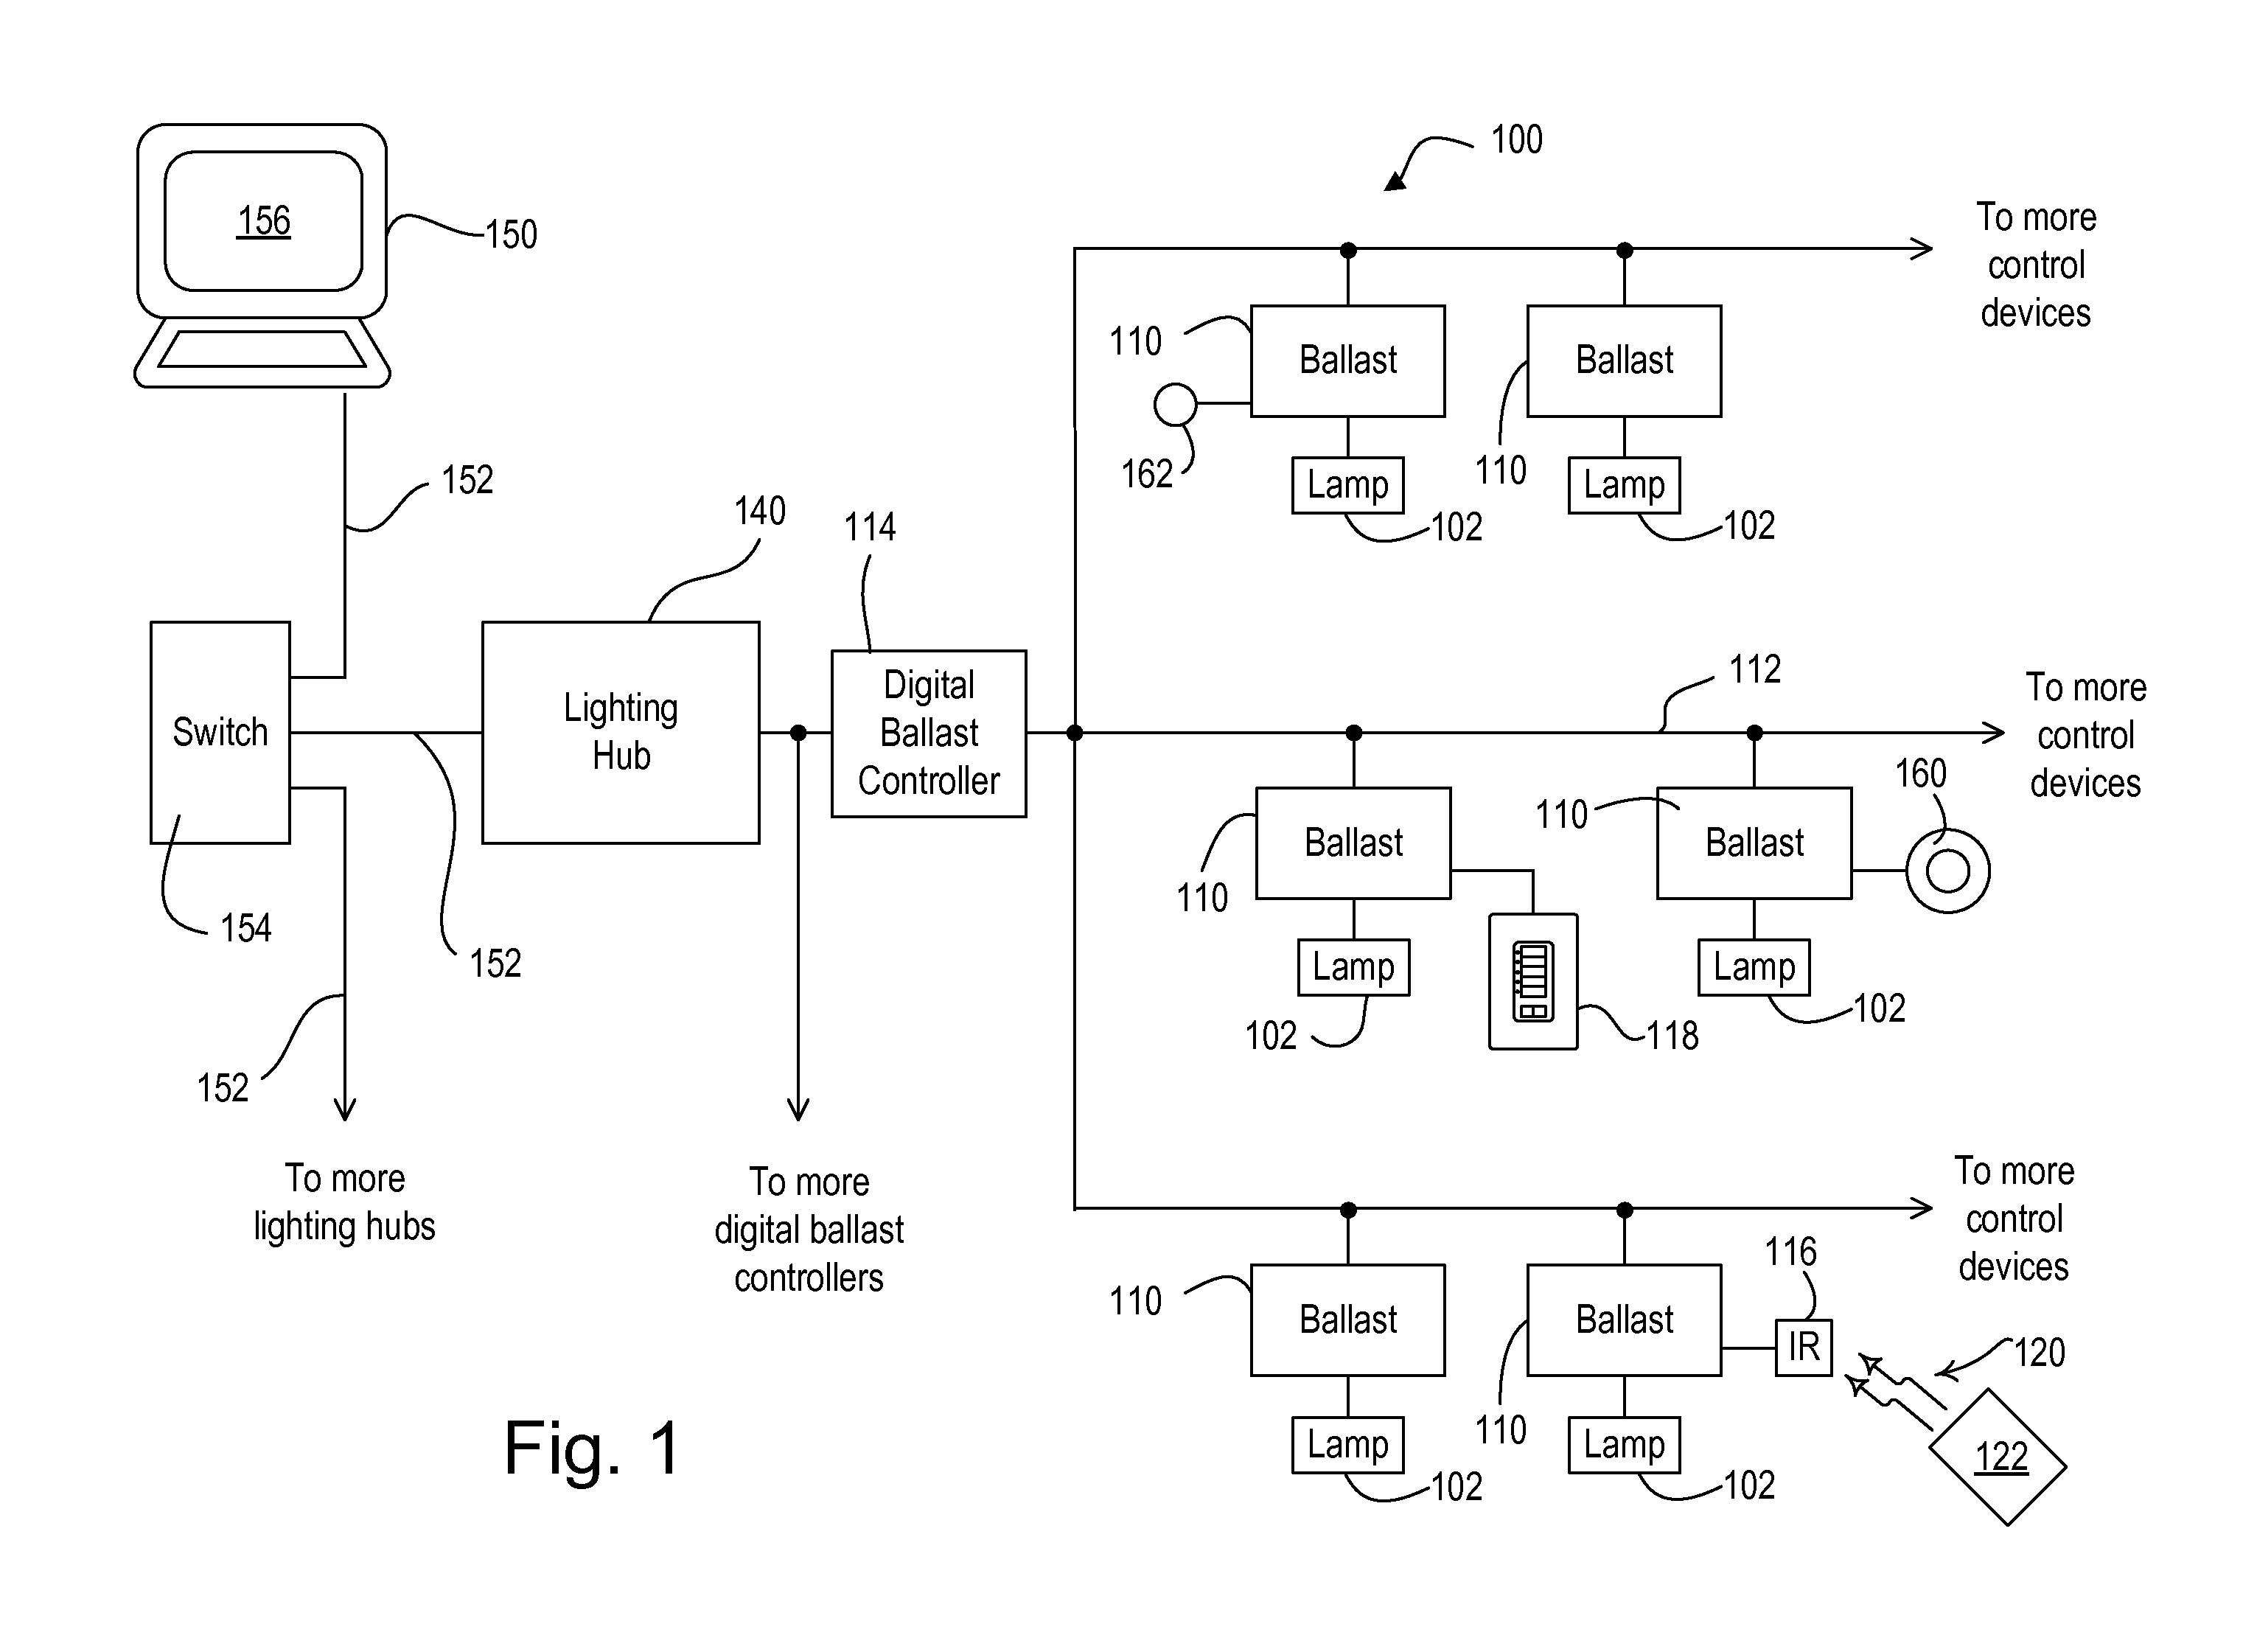 Method of Semi-Automatic Ballast Replacement